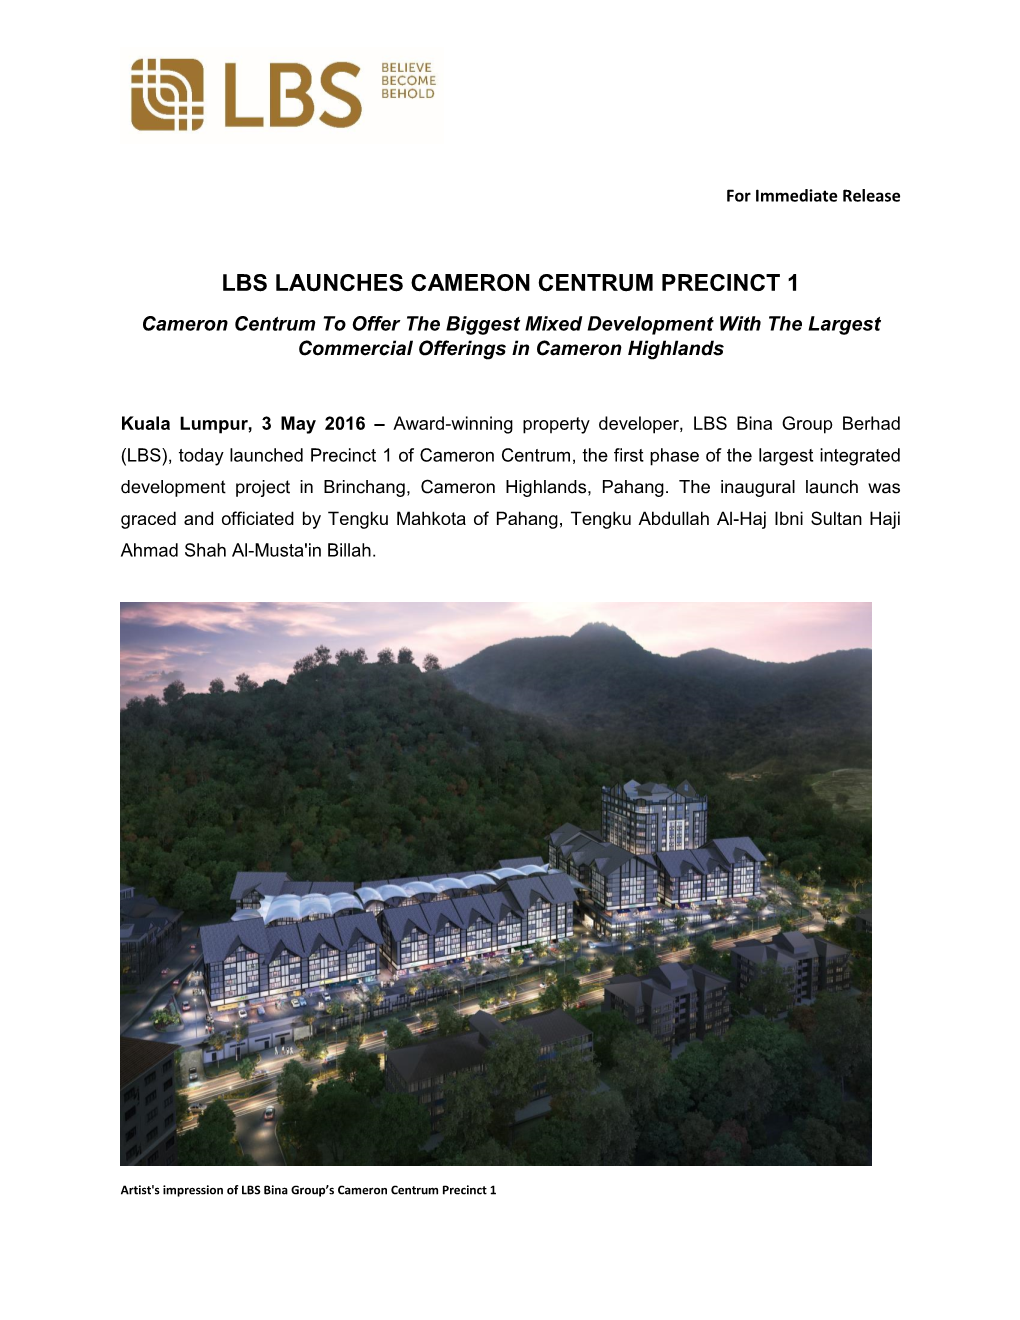 LBS LAUNCHES CAMERON CENTRUM PRECINCT 1 Cameron Centrum to Offer the Biggest Mixed Development with the Largest Commercial Offerings in Cameron Highlands